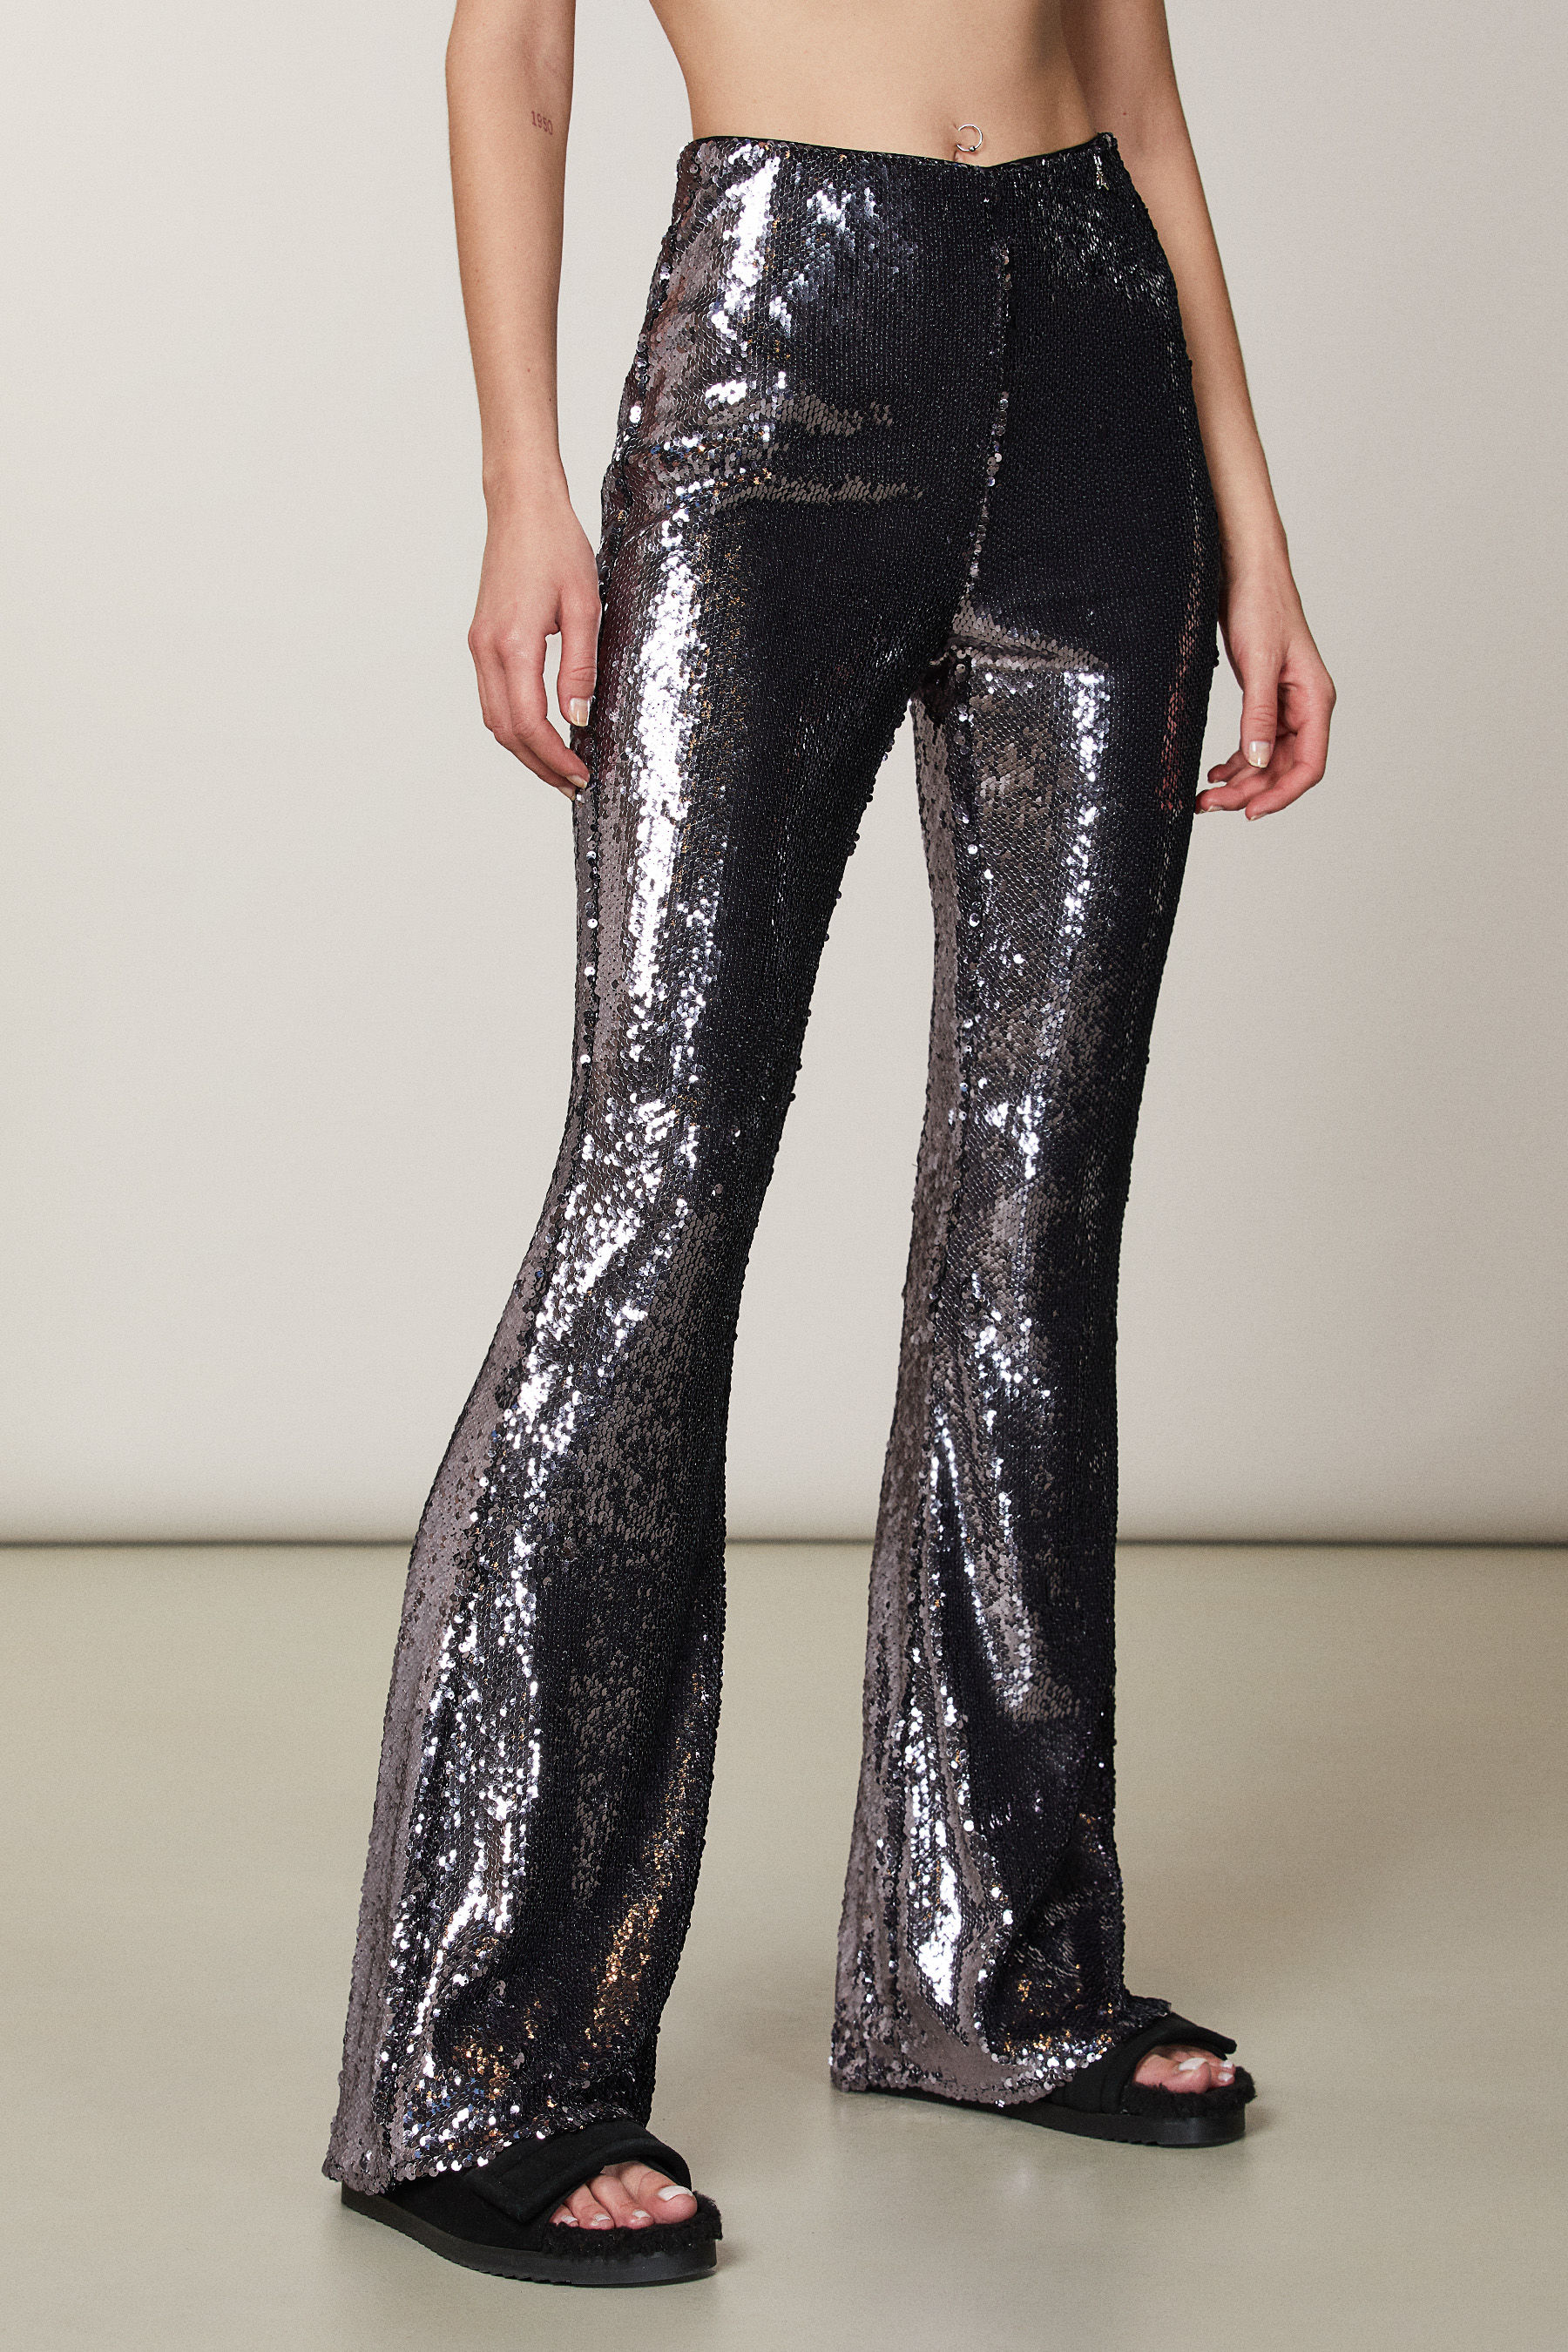 Missguided Silver Sequin Flared Leg Pants  ShopStyle Clothes and Shoes   Festliches outfit Modestil Festliche kleidung